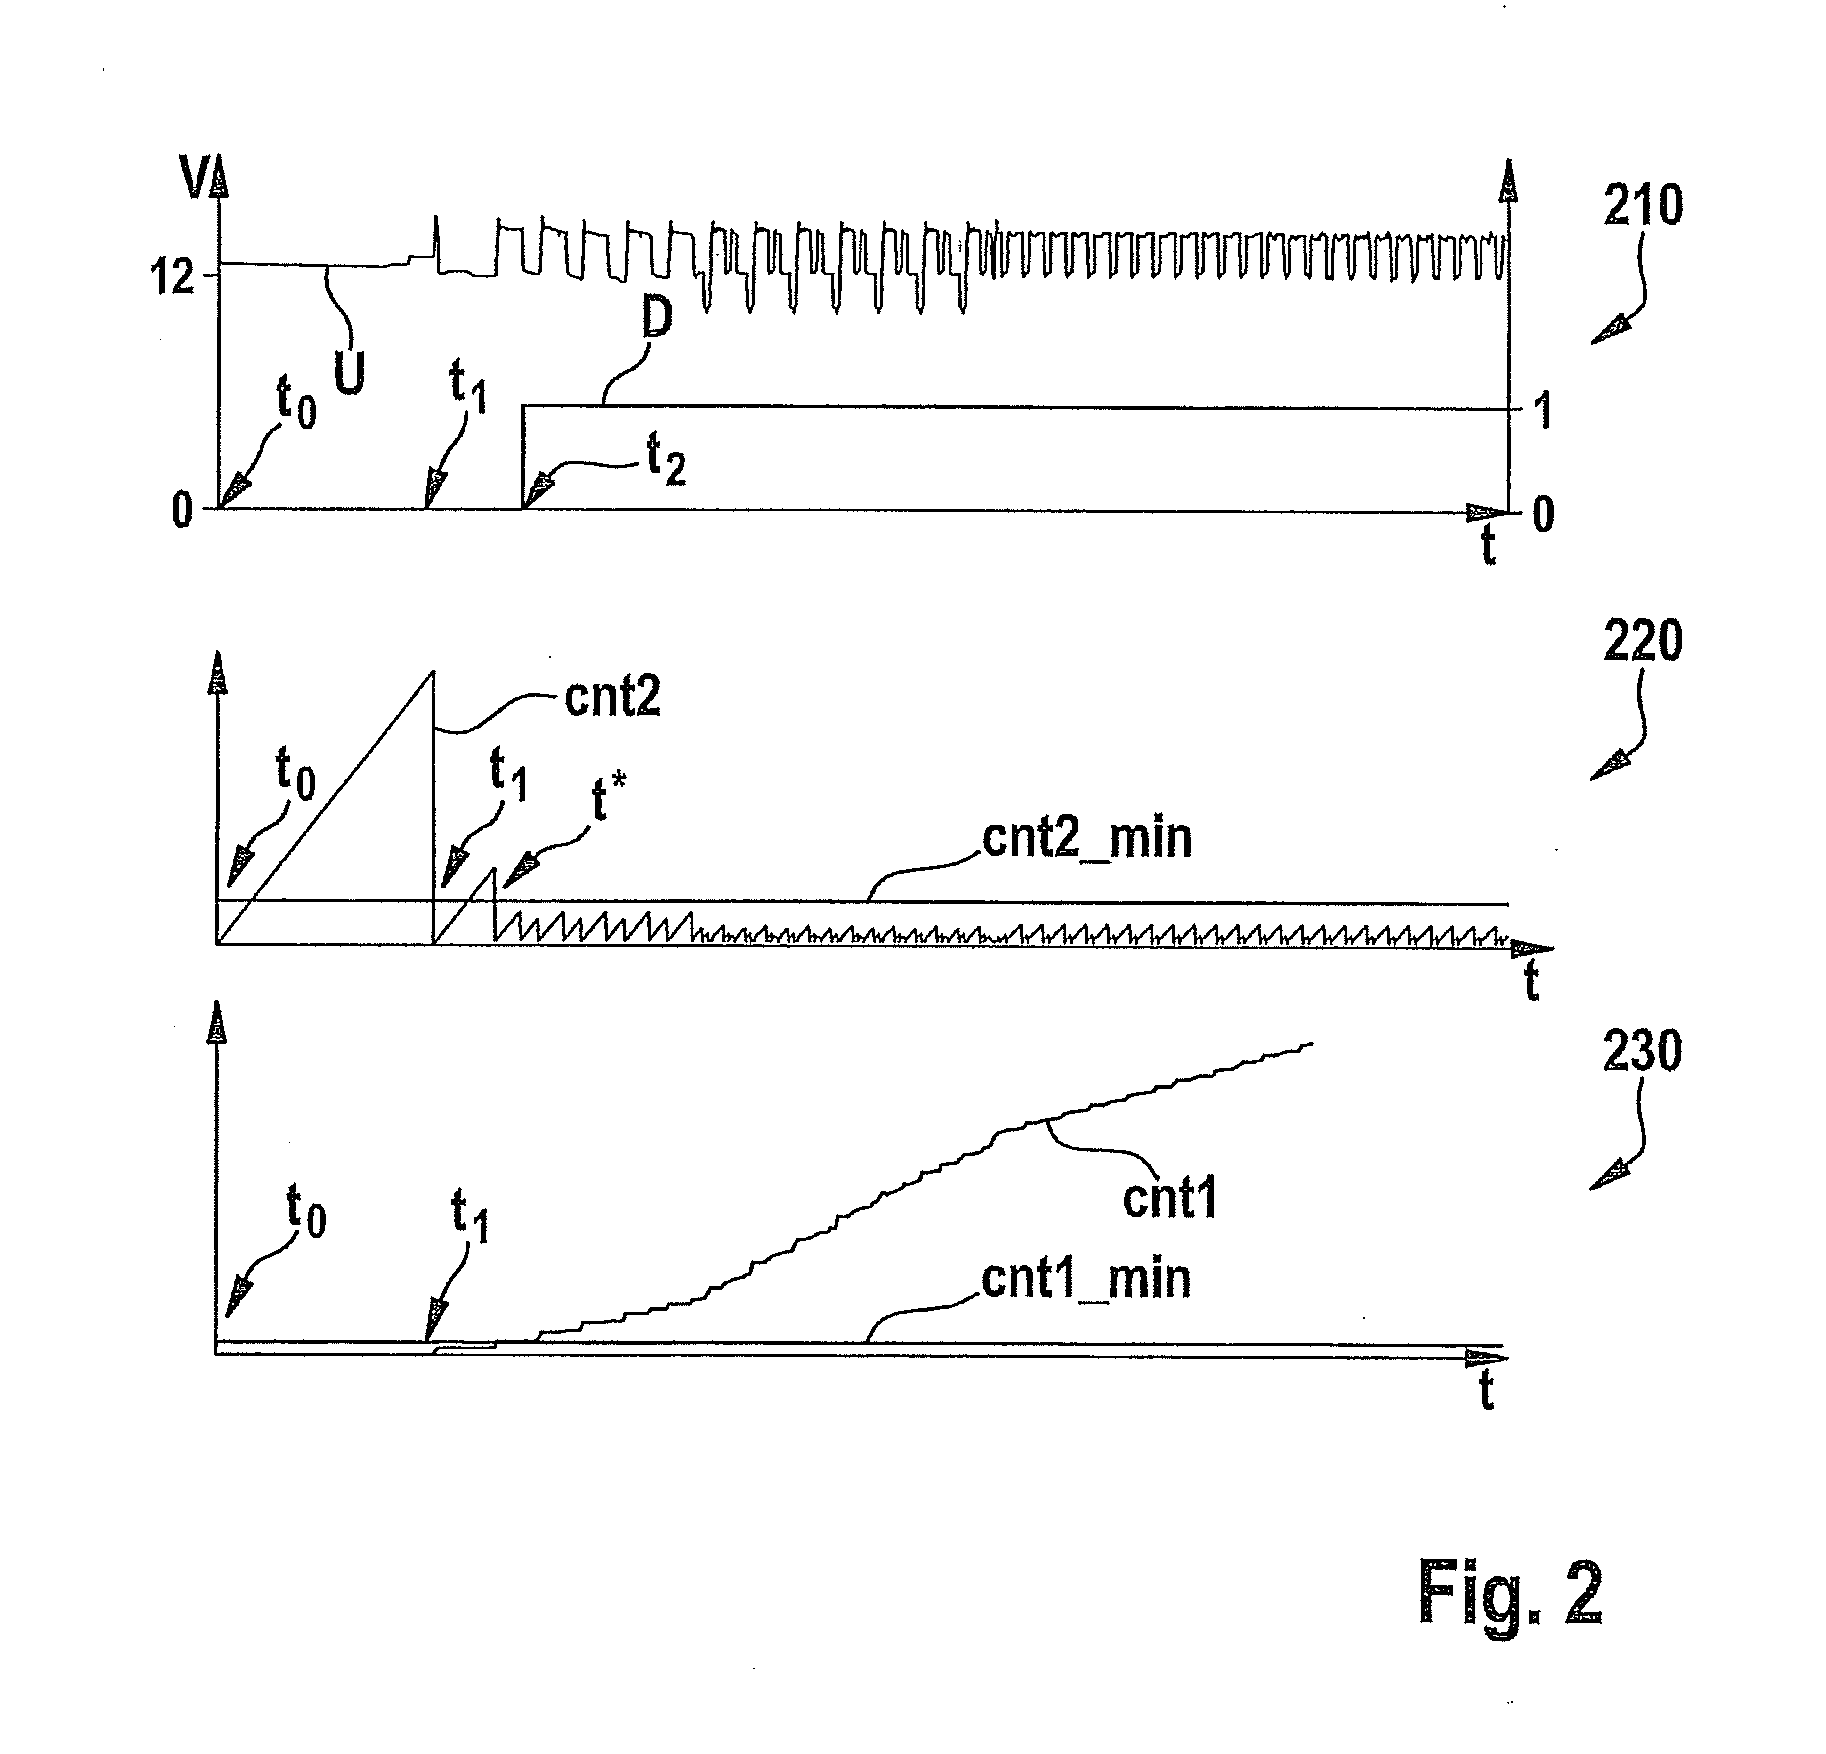 Method for assessing the ripple of a signal